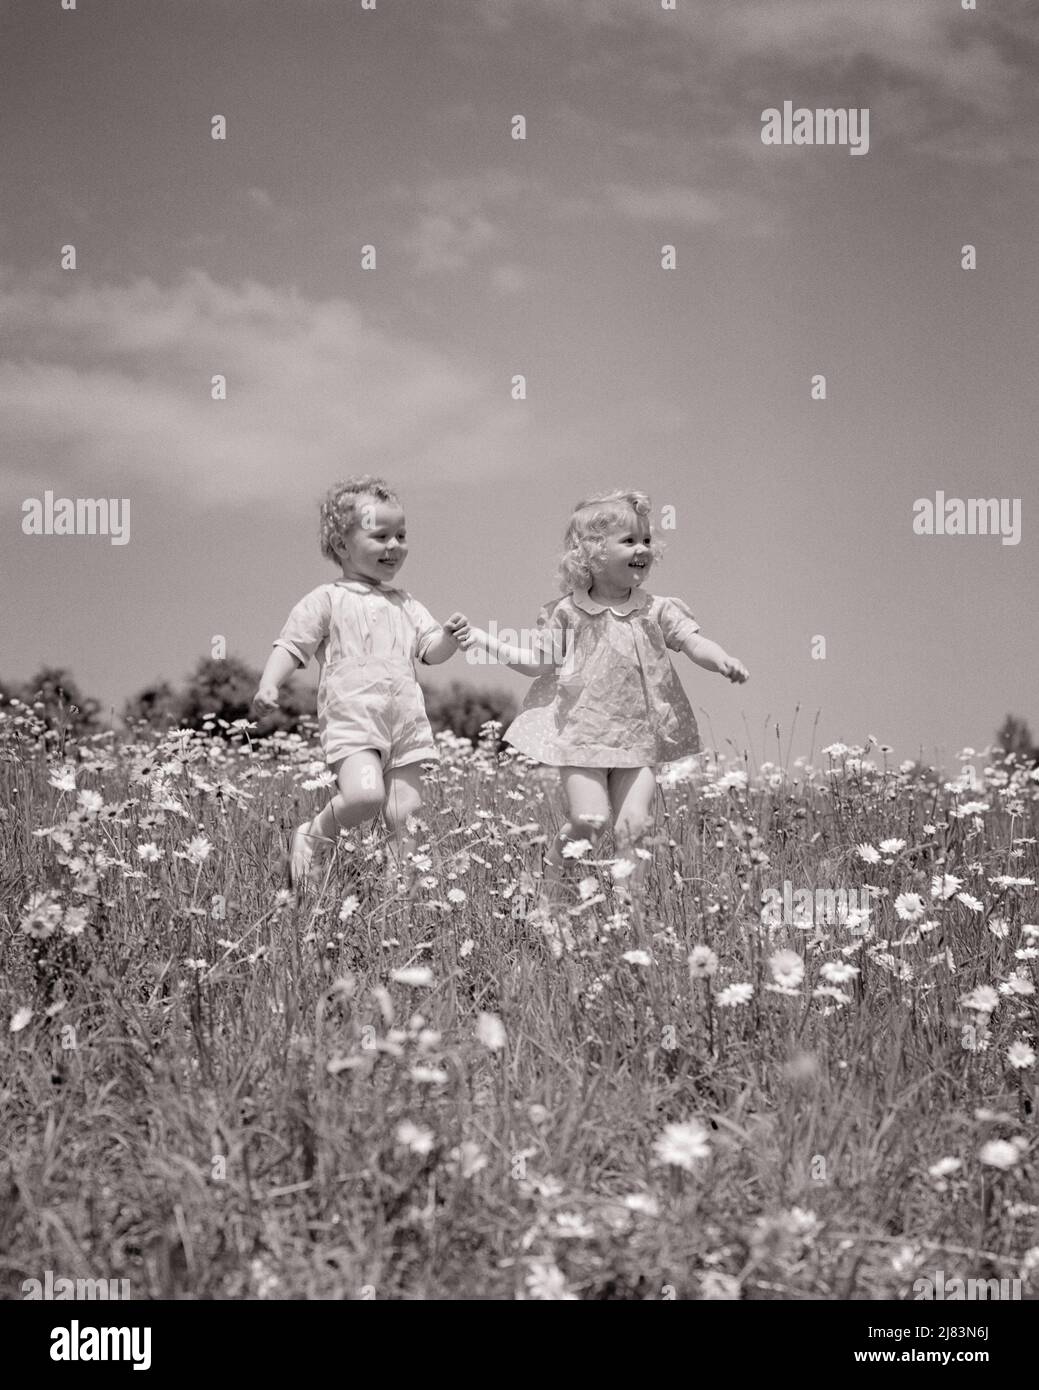 1940s SMILING TODDLER BOY AND GIRL SISTER BROTHER HOLDING HANDS RUNNING THROUGH A SPRINGTIME FIELD OF DAISIES - j6067 HAR001 HARS STYLE BLOND FRIEND PLEASED JOY LIFESTYLE FEMALES WINNING BROTHERS RURAL HEALTHINESS NATURE COPY SPACE FRIENDSHIP FULL-LENGTH PERSONS INSPIRATION MALES SIBLINGS SISTERS B&W DAISY TODDLERS SUMMERTIME DAISIES FREEDOM HAPPINESS CHEERFUL AND LOW ANGLE HOLDING HANDS SIBLING SMILES FRIENDLY JOYFUL BABY BOY PLEASANT AGREEABLE CHARMING GROWTH LOVABLE PLEASING SEASON WILDFLOWERS ADORABLE APPEALING BLACK AND WHITE CAUCASIAN ETHNICITY HAR001 OLD FASHIONED Stock Photo